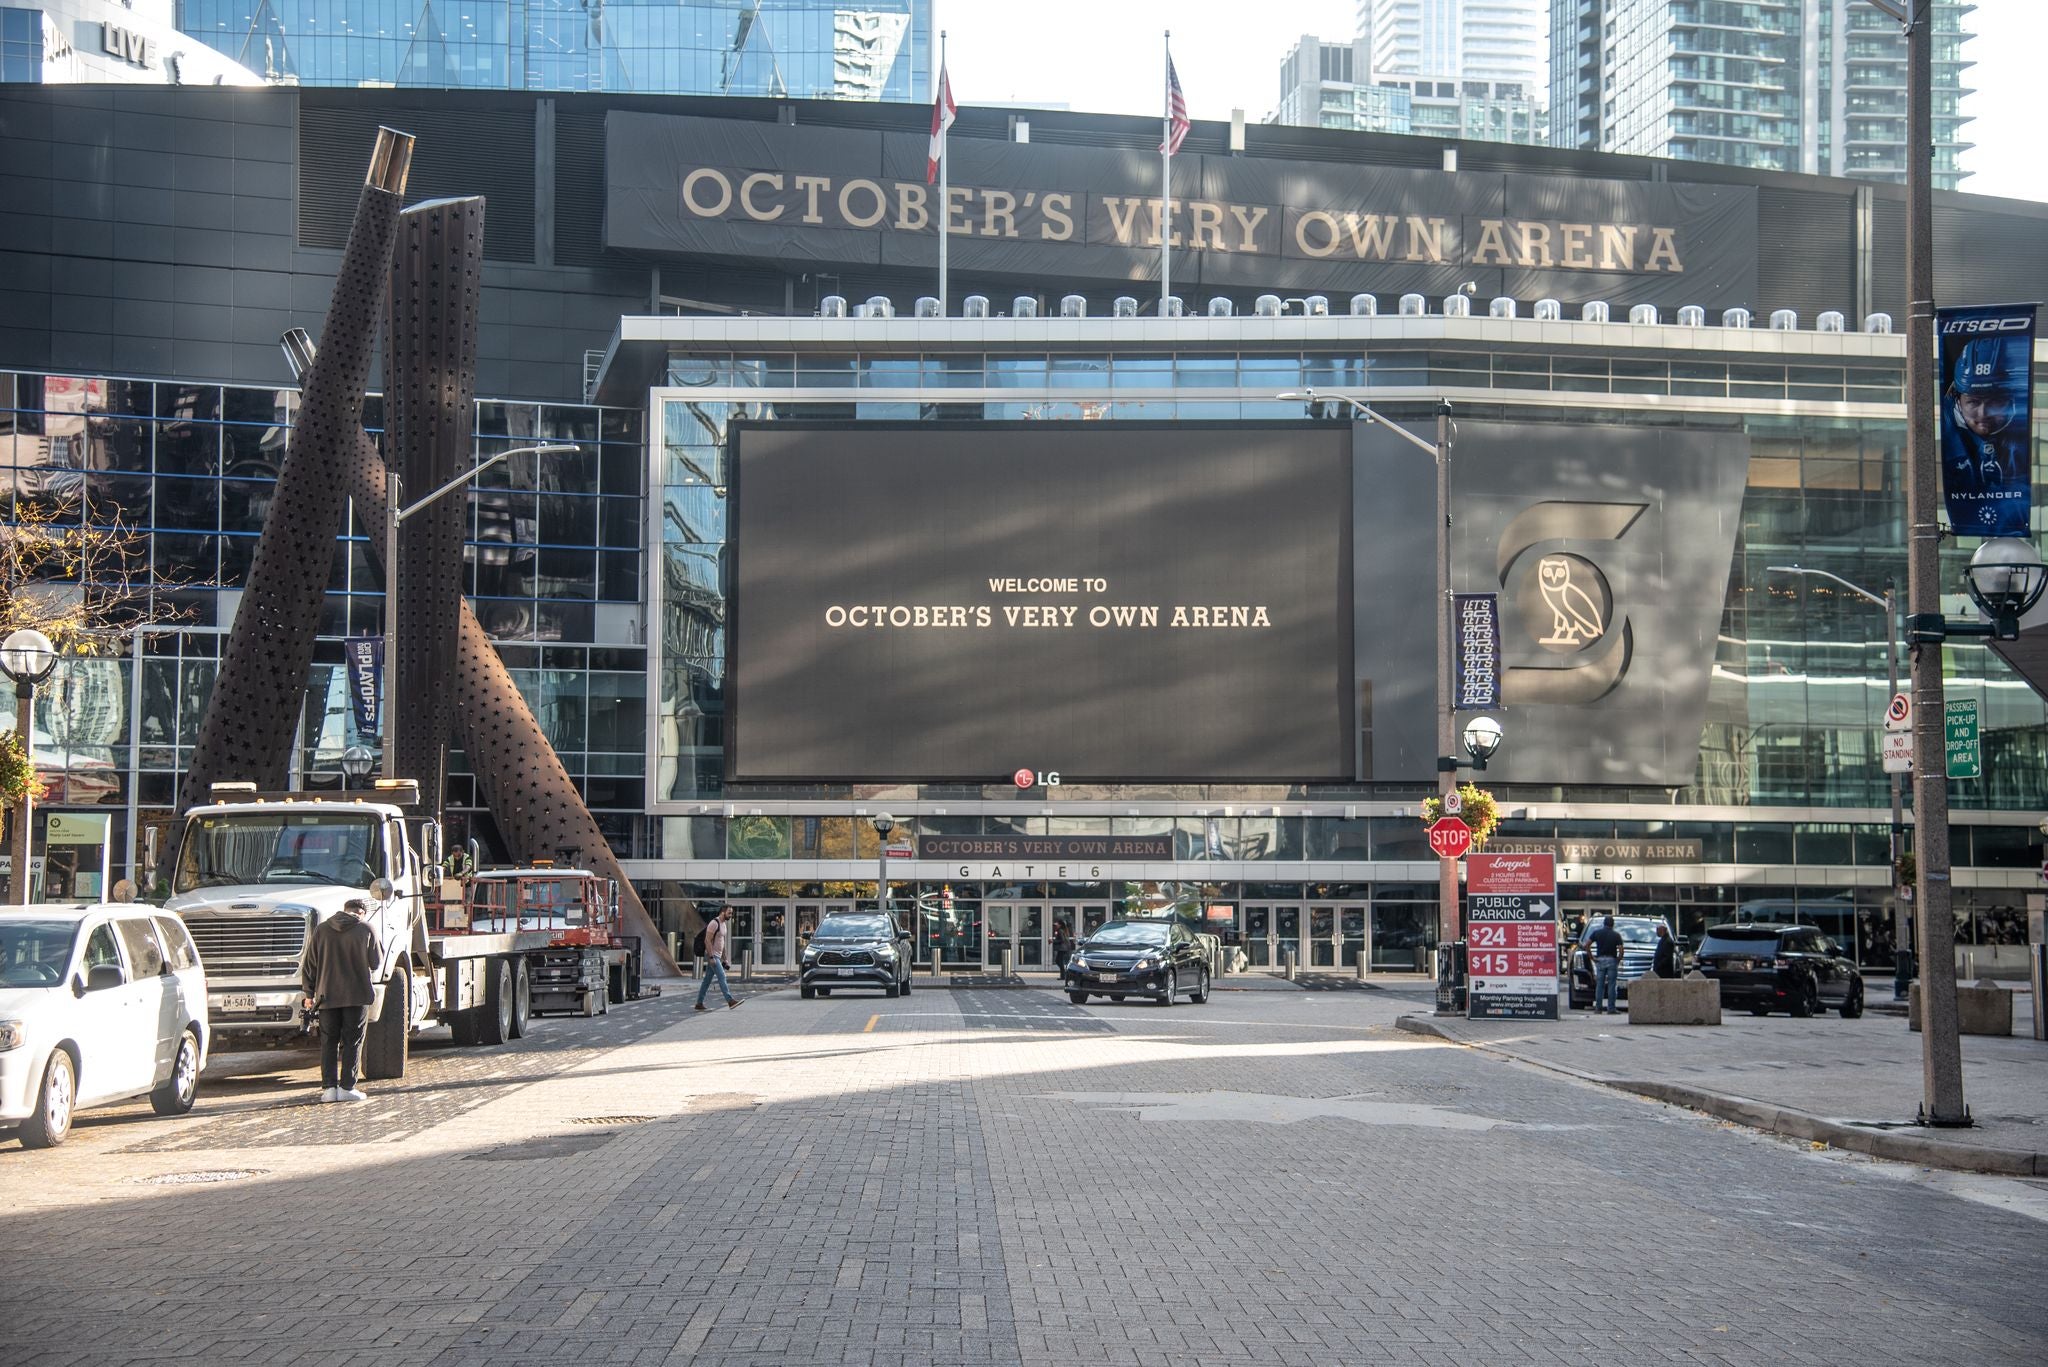 More Info for SCOTIABANK ARENA TRANSFORMS TO ‘OCTOBER’S VERY OWN ARENA’ FOR DRAKE’S HOMECOMING TOUR DATES